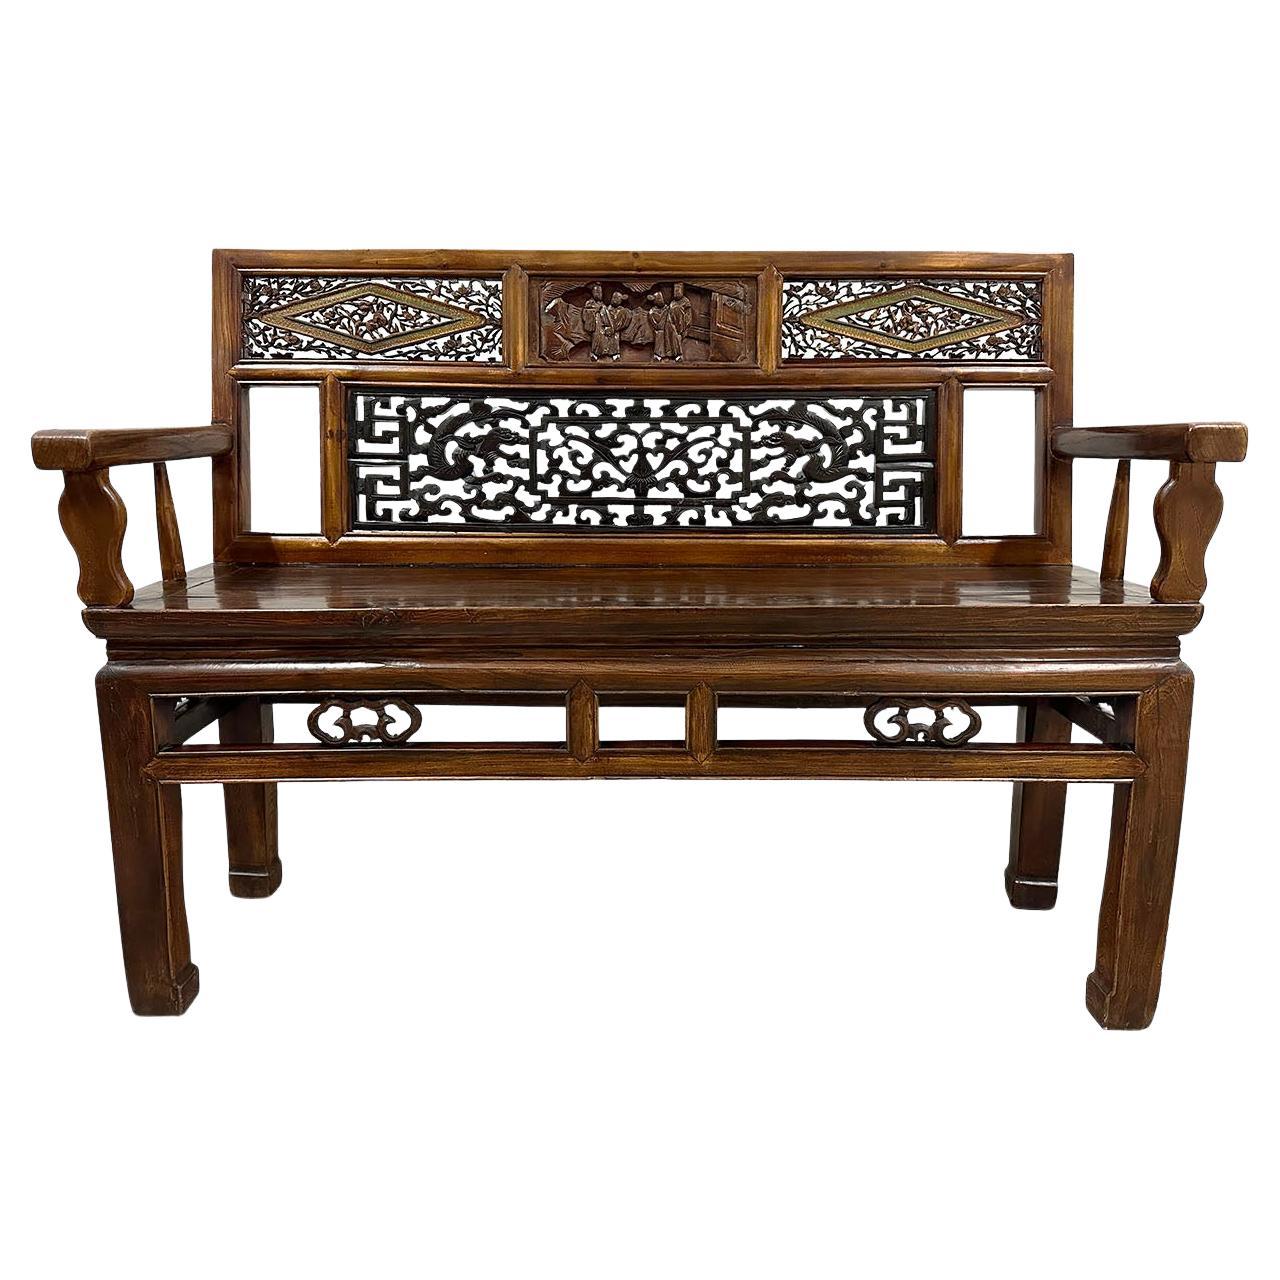 Late 19th Century Chinese Carved Hall Bench, Love Seat